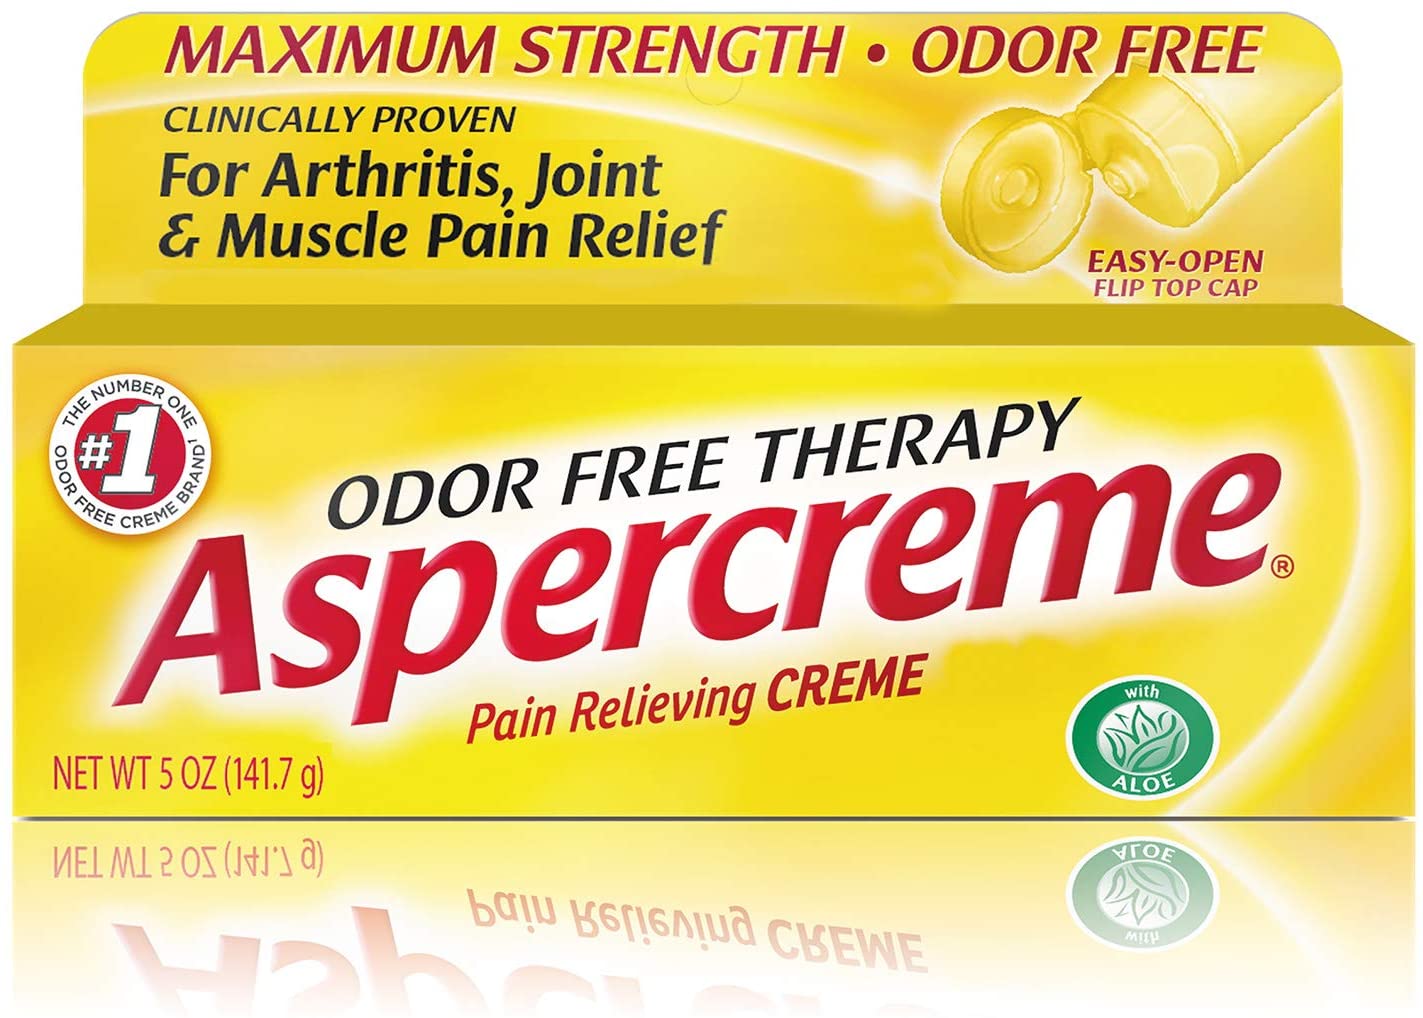 Money Maker + Up to 2 FREE Aspercreme Pain Relief Products at CVS